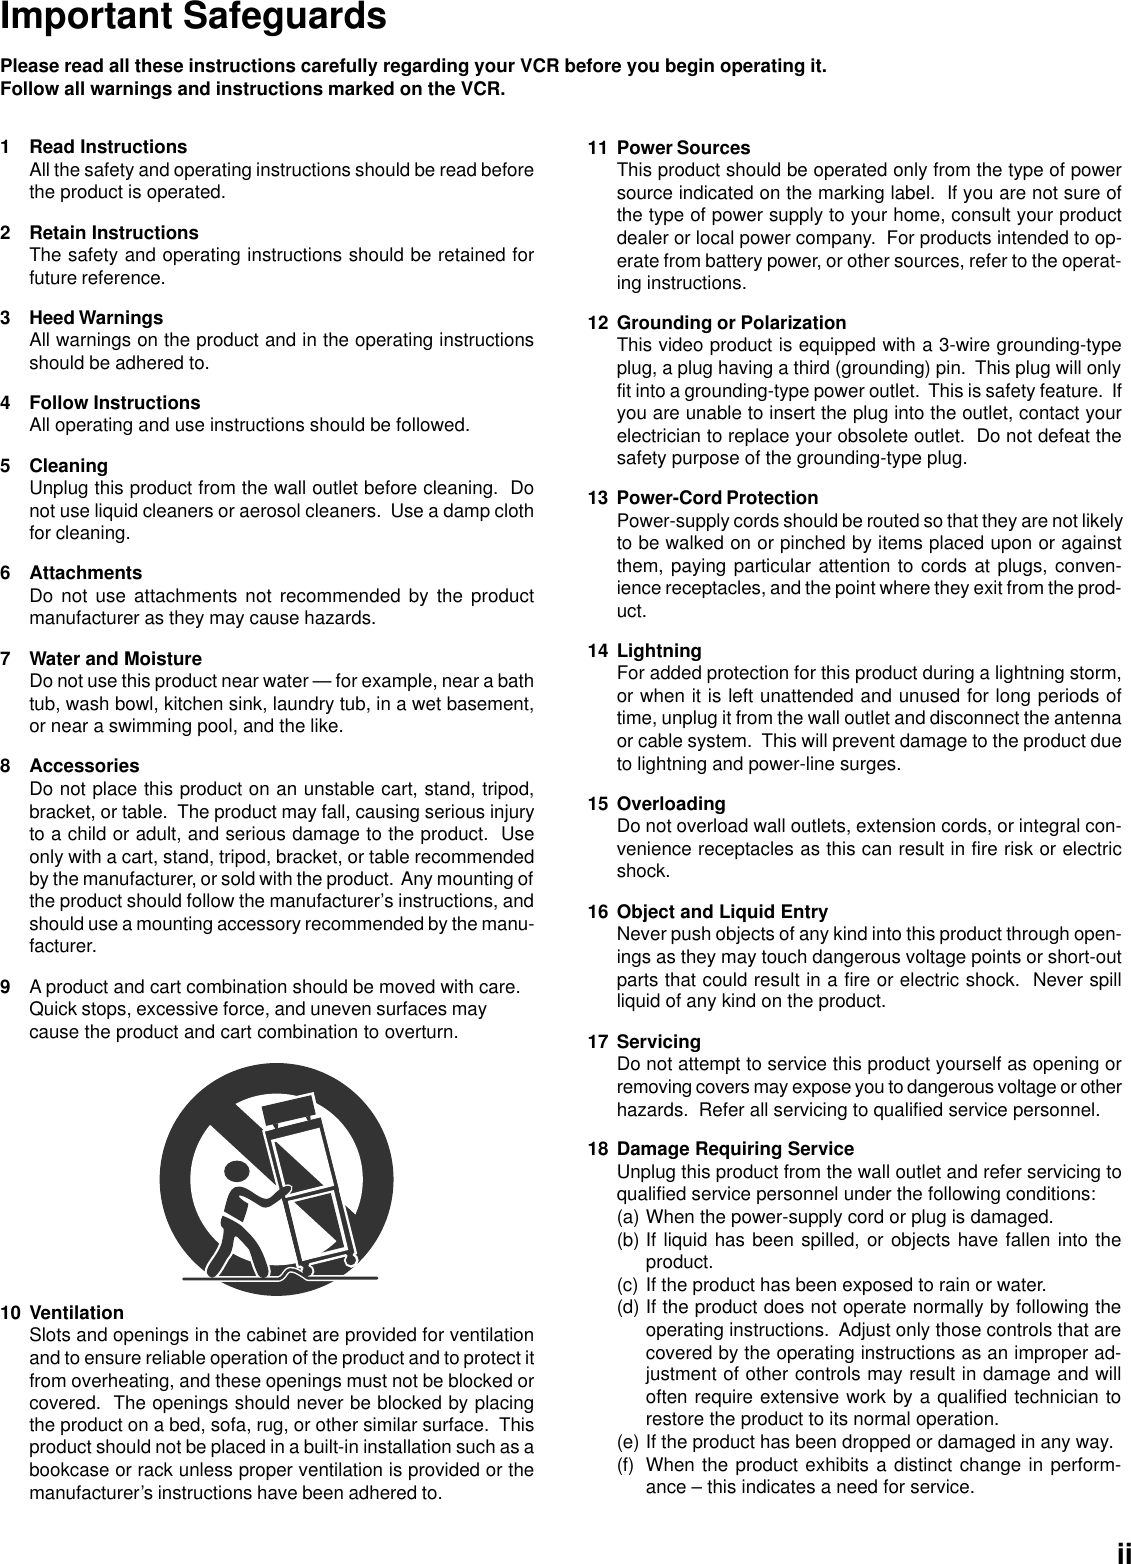 Important SafeguardsPlease read all these instructions carefully regarding your VCR before you begin operating it.Follow all warnings and instructions marked on the VCR.1 Read InstructionsAll the safety and operating instructions should be read beforethe product is operated.2 Retain InstructionsThe safety and operating instructions should be retained forfuture reference.3 Heed WarningsAll warnings on the product and in the operating instructionsshould be adhered to.4 Follow InstructionsAll operating and use instructions should be followed.5 CleaningUnplug this product from the wall outlet before cleaning.  Donot use liquid cleaners or aerosol cleaners.  Use a damp clothfor cleaning.6 AttachmentsDo not use attachments not recommended by the productmanufacturer as they may cause hazards.7 Water and MoistureDo not use this product near water — for example, near a bathtub, wash bowl, kitchen sink, laundry tub, in a wet basement,or near a swimming pool, and the like.8 AccessoriesDo not place this product on an unstable cart, stand, tripod,bracket, or table.  The product may fall, causing serious injuryto a child or adult, and serious damage to the product.  Useonly with a cart, stand, tripod, bracket, or table recommendedby the manufacturer, or sold with the product.  Any mounting ofthe product should follow the manufacturer’s instructions, andshould use a mounting accessory recommended by the manu-facturer.9A product and cart combination should be moved with care.Quick stops, excessive force, and uneven surfaces maycause the product and cart combination to overturn.11 Power SourcesThis product should be operated only from the type of powersource indicated on the marking label.  If you are not sure ofthe type of power supply to your home, consult your productdealer or local power company.  For products intended to op-erate from battery power, or other sources, refer to the operat-ing instructions.12 Grounding or PolarizationThis video product is equipped with a 3-wire grounding-typeplug, a plug having a third (grounding) pin.  This plug will onlyfit into a grounding-type power outlet.  This is safety feature.  Ifyou are unable to insert the plug into the outlet, contact yourelectrician to replace your obsolete outlet.  Do not defeat thesafety purpose of the grounding-type plug.13 Power-Cord ProtectionPower-supply cords should be routed so that they are not likelyto be walked on or pinched by items placed upon or againstthem, paying particular attention to cords at plugs, conven-ience receptacles, and the point where they exit from the prod-uct.14 LightningFor added protection for this product during a lightning storm,or when it is left unattended and unused for long periods oftime, unplug it from the wall outlet and disconnect the antennaor cable system.  This will prevent damage to the product dueto lightning and power-line surges.15 OverloadingDo not overload wall outlets, extension cords, or integral con-venience receptacles as this can result in fire risk or electricshock.16 Object and Liquid EntryNever push objects of any kind into this product through open-ings as they may touch dangerous voltage points or short-outparts that could result in a fire or electric shock.  Never spillliquid of any kind on the product.17 ServicingDo not attempt to service this product yourself as opening orremoving covers may expose you to dangerous voltage or otherhazards.  Refer all servicing to qualified service personnel.18 Damage Requiring ServiceUnplug this product from the wall outlet and refer servicing toqualified service personnel under the following conditions:(a) When the power-supply cord or plug is damaged.(b) If liquid has been spilled, or objects have fallen into theproduct.(c) If the product has been exposed to rain or water.(d) If the product does not operate normally by following theoperating instructions.  Adjust only those controls that arecovered by the operating instructions as an improper ad-justment of other controls may result in damage and willoften require extensive work by a qualified technician torestore the product to its normal operation.(e) If the product has been dropped or damaged in any way.(f) When the product exhibits a distinct change in perform-ance – this indicates a need for service.10 VentilationSlots and openings in the cabinet are provided for ventilationand to ensure reliable operation of the product and to protect itfrom overheating, and these openings must not be blocked orcovered.  The openings should never be blocked by placingthe product on a bed, sofa, rug, or other similar surface.  Thisproduct should not be placed in a built-in installation such as abookcase or rack unless proper ventilation is provided or themanufacturer’s instructions have been adhered to.ii